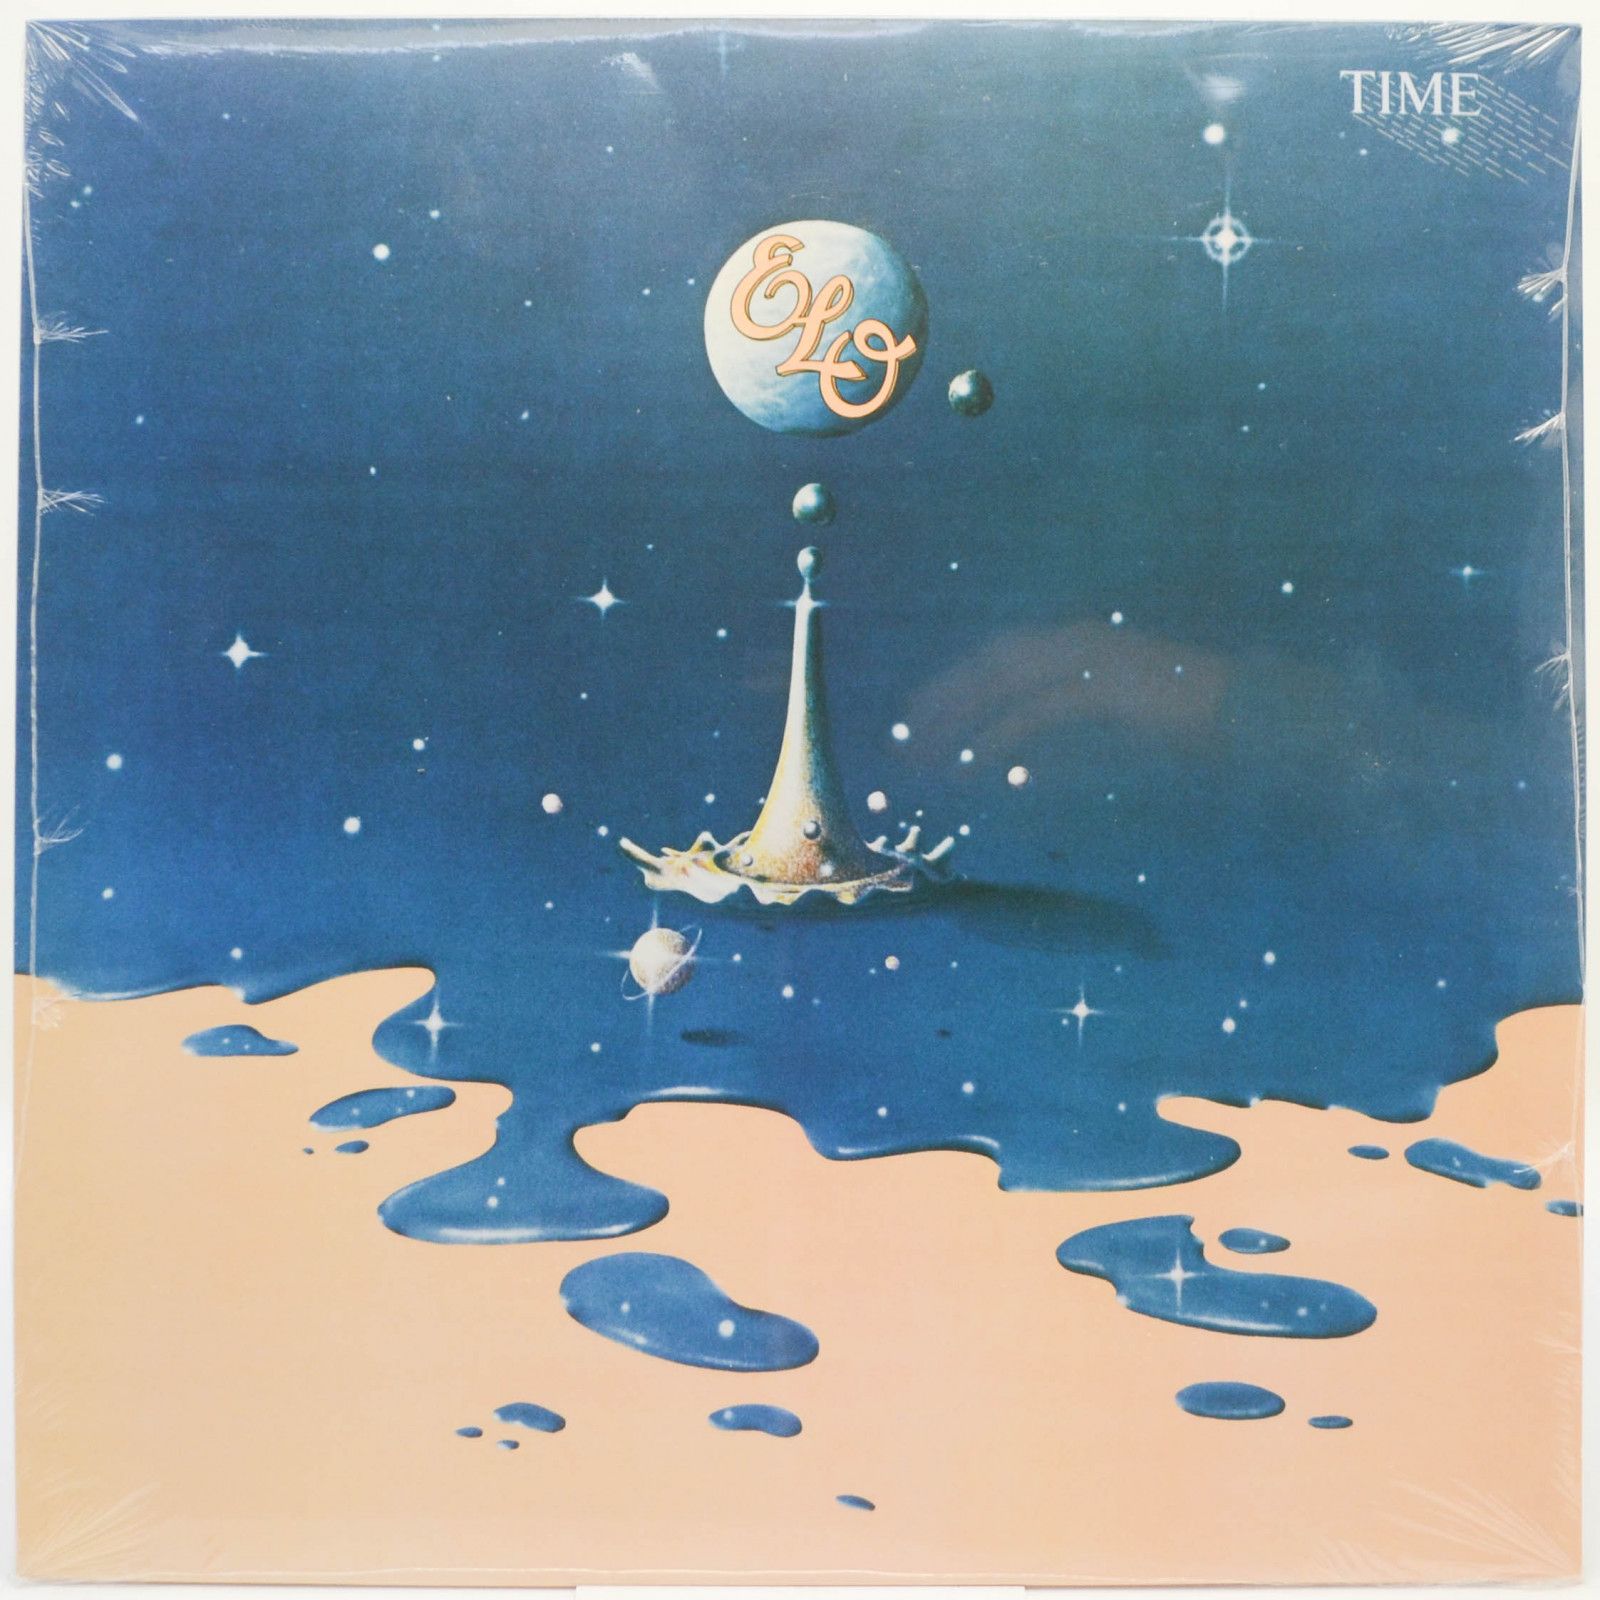 Electric Light Orchestra — Time, 1981